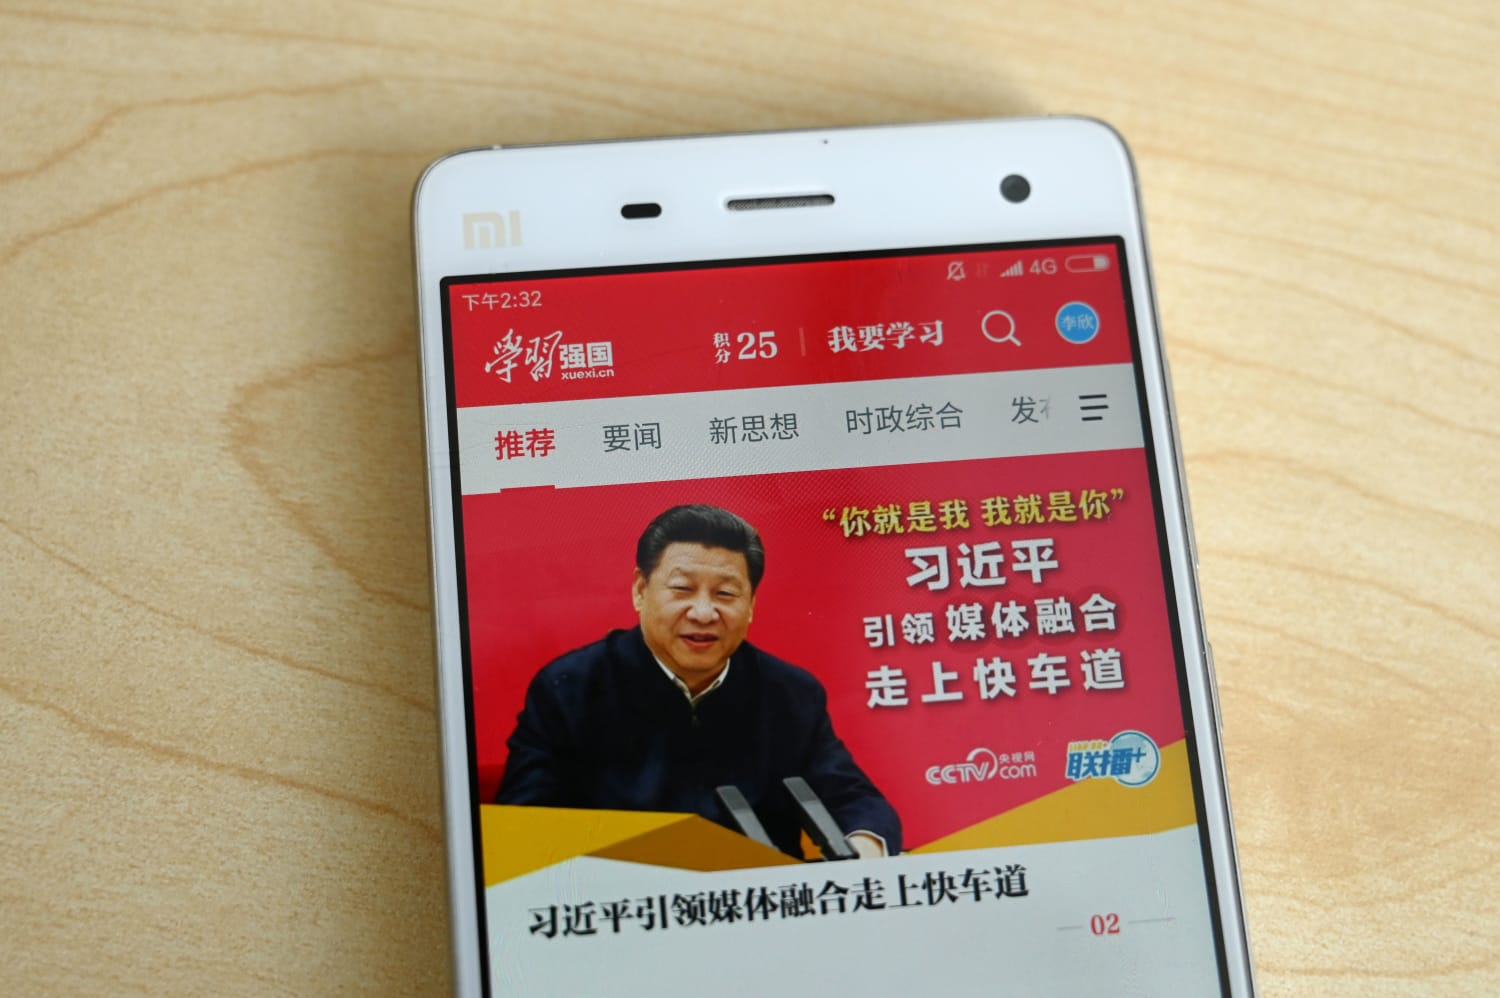 Chinese app pushing Xi's ideology has 'backdoor' that could let Beijing snoop on users, report says